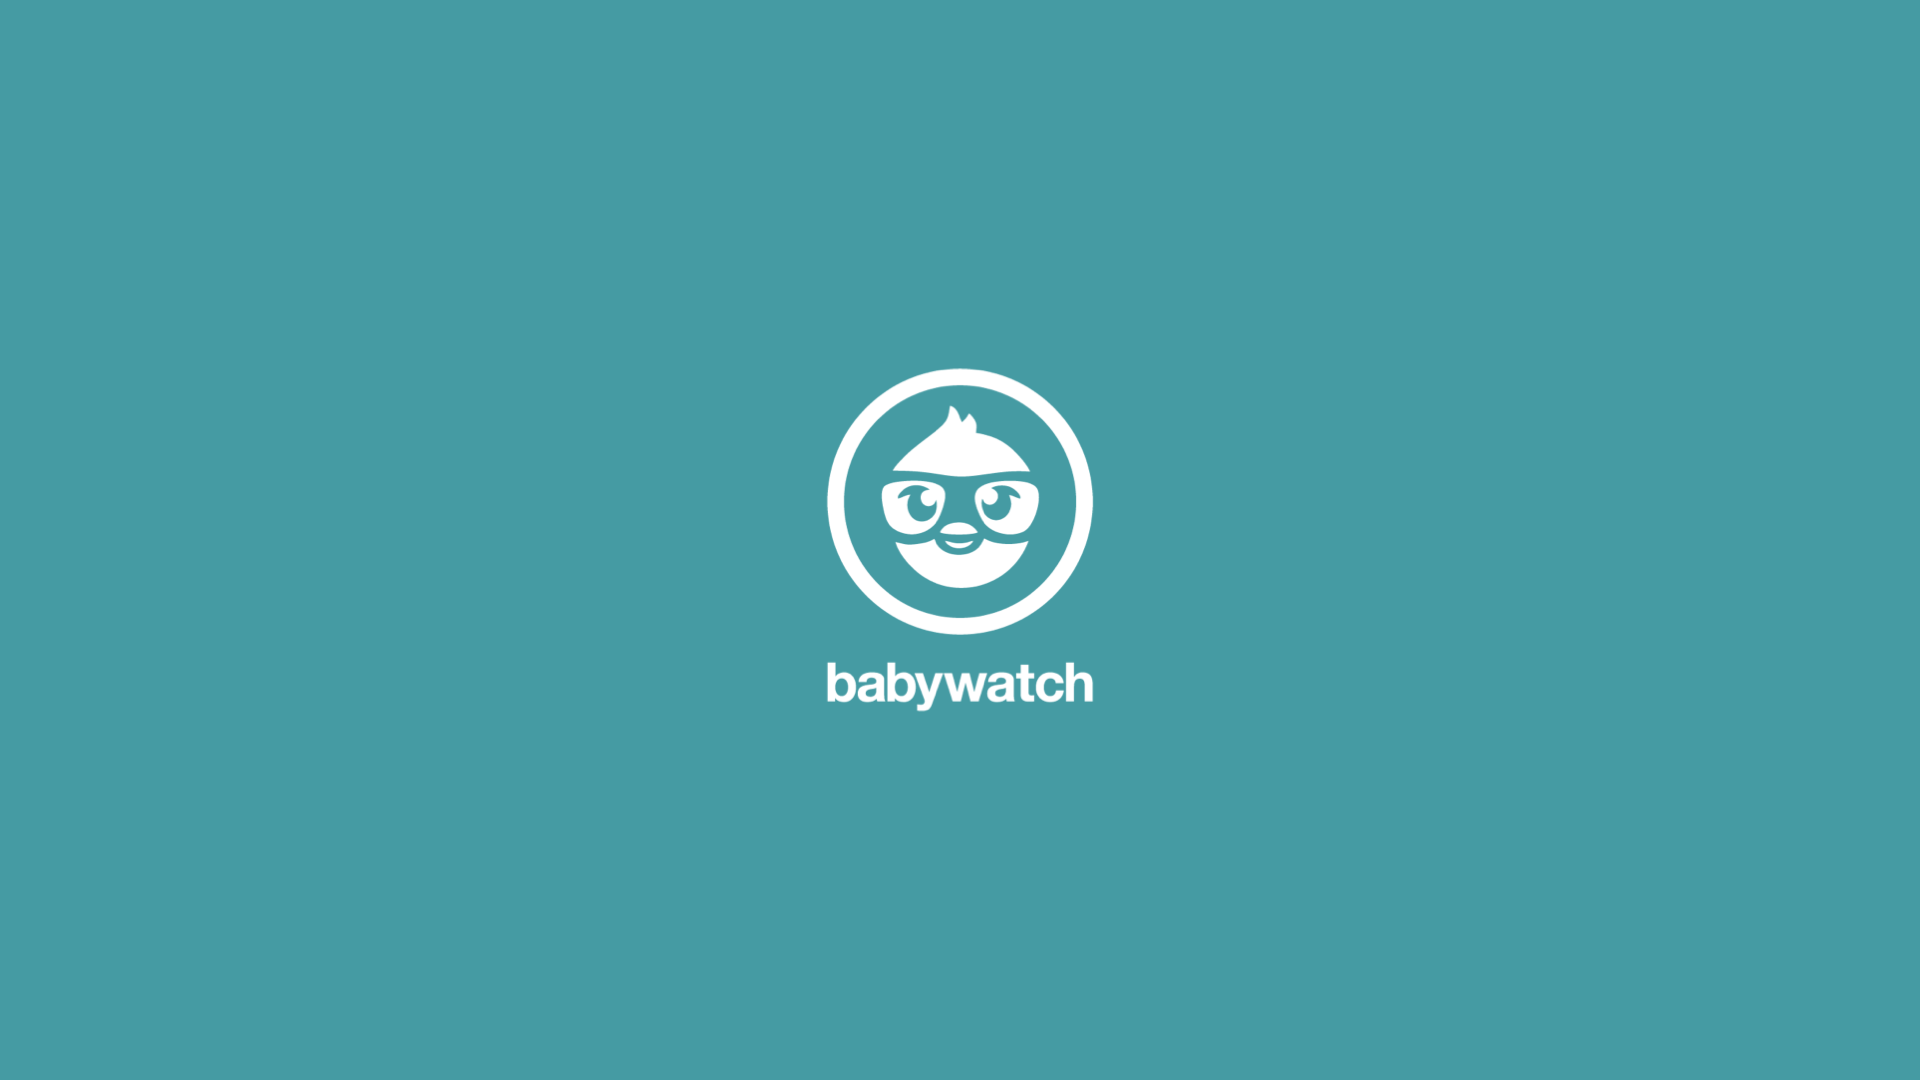 Babywatch Brand Guidelines v1.027.png